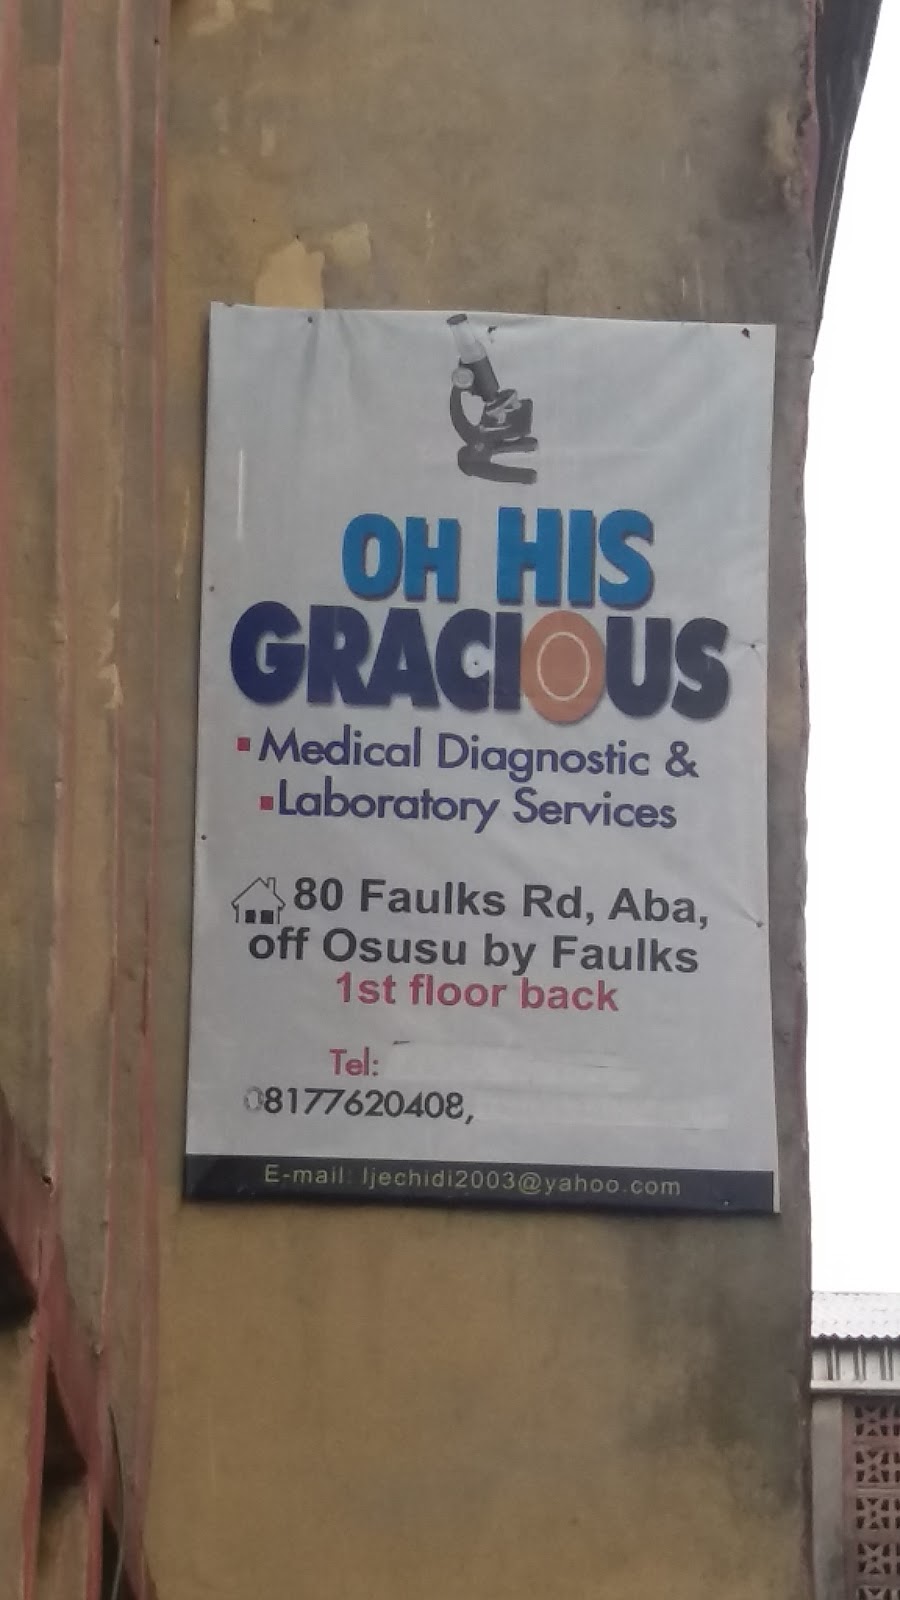 Oh His Gracious Medical Diagnostic & Laboratory Services